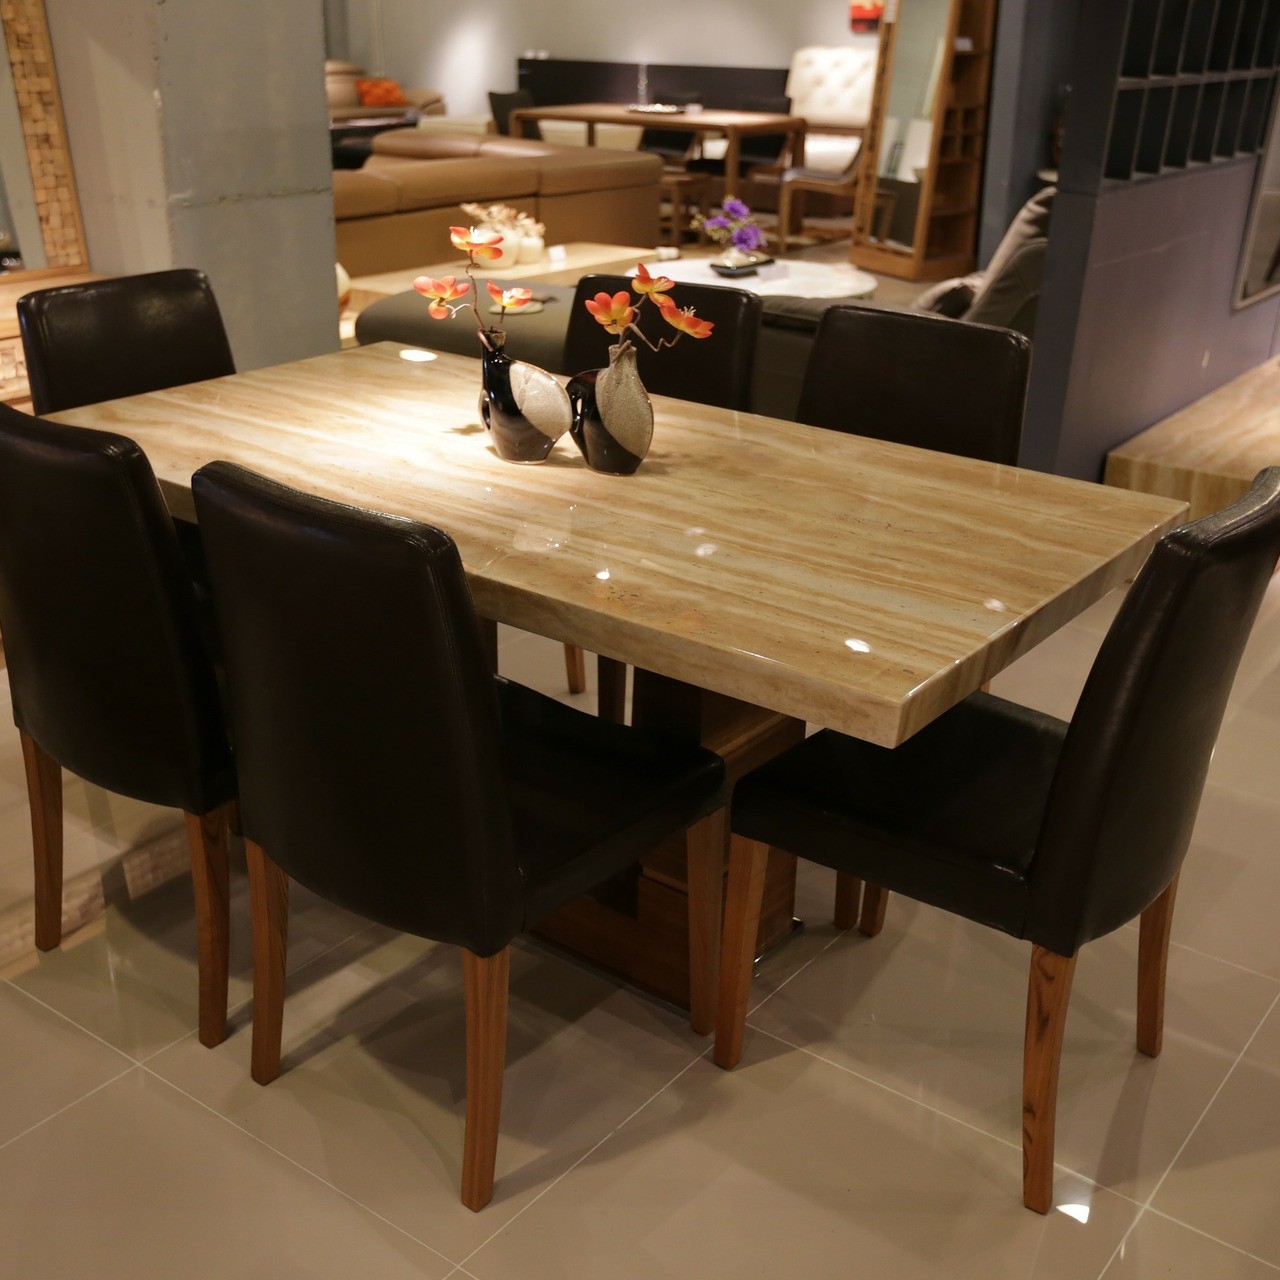 Wooden table as part of a beautiful dining room design